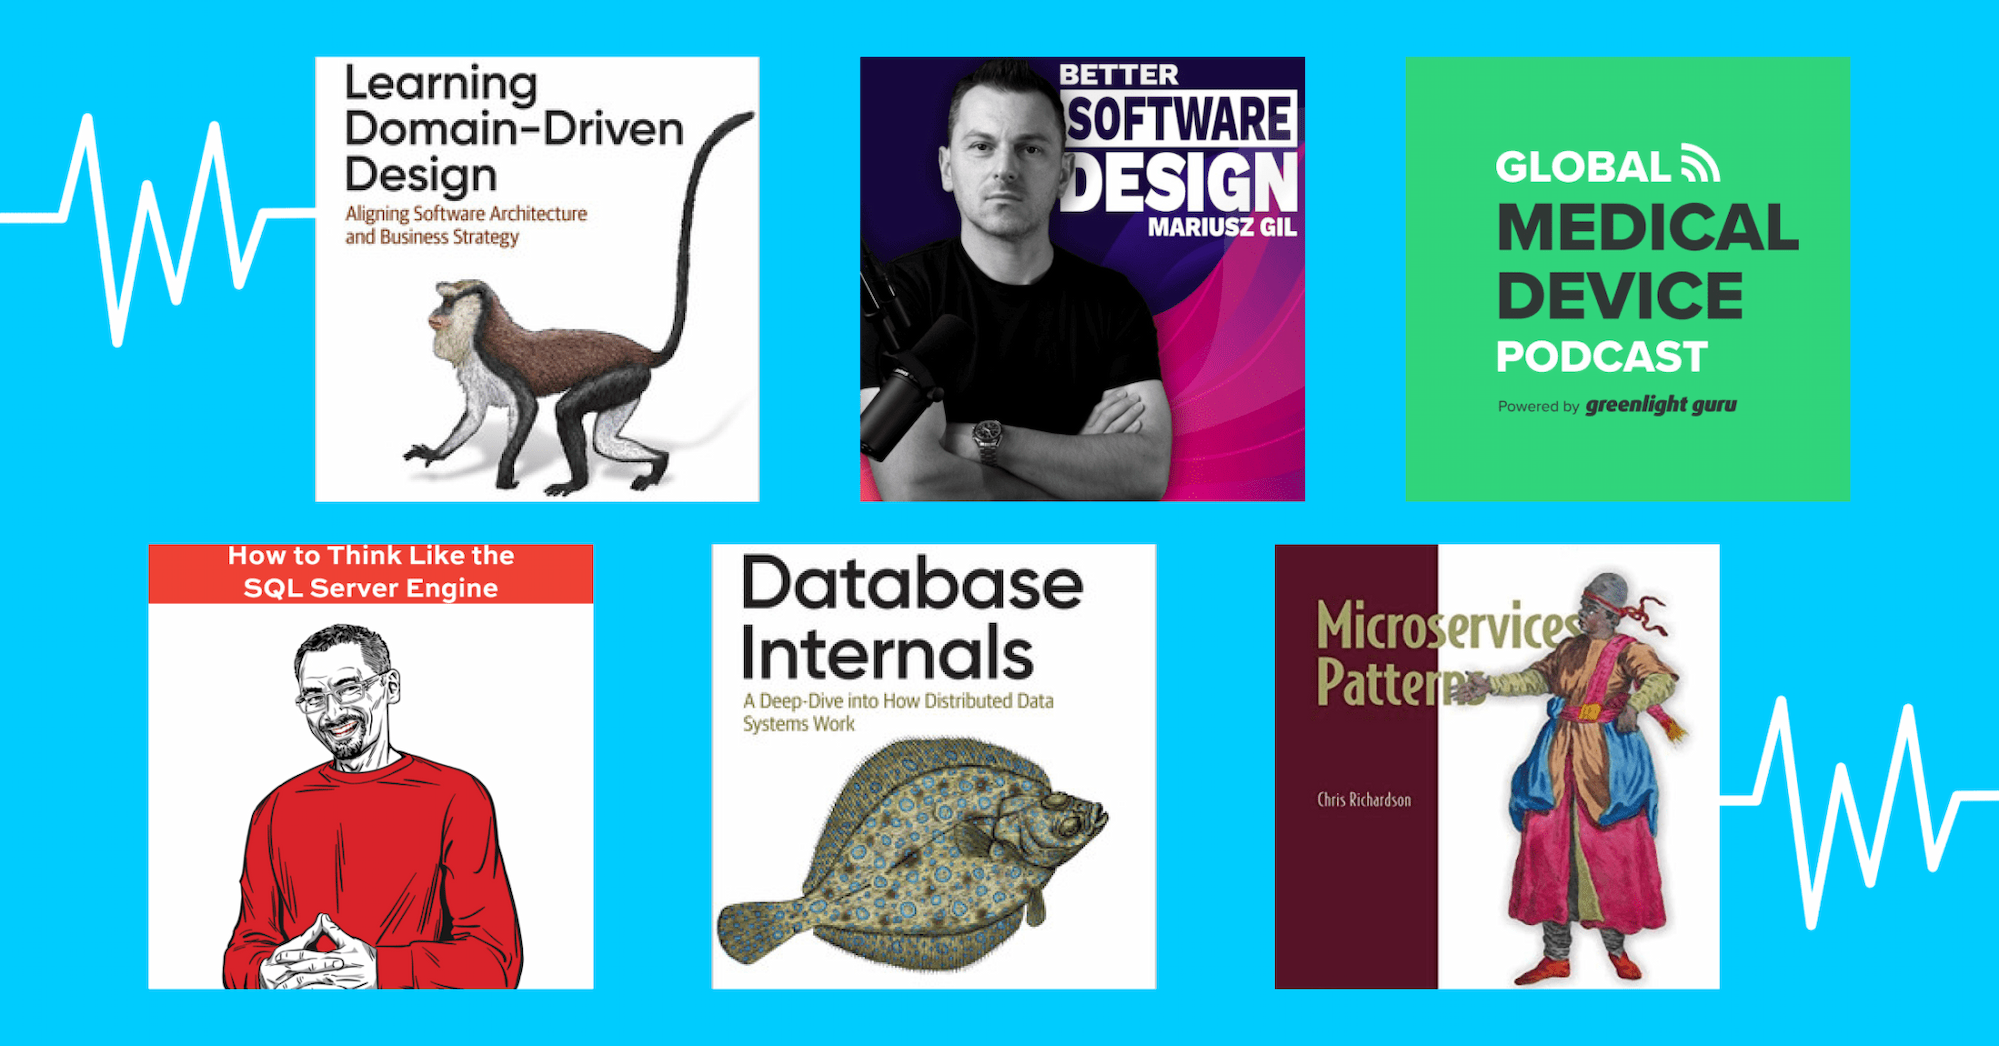 Books, blogs and podcasts recommended by Revolve developers: “Learning Domain-Driven Design”, “Database Internals”, “Global Medical Device Podcast” and others